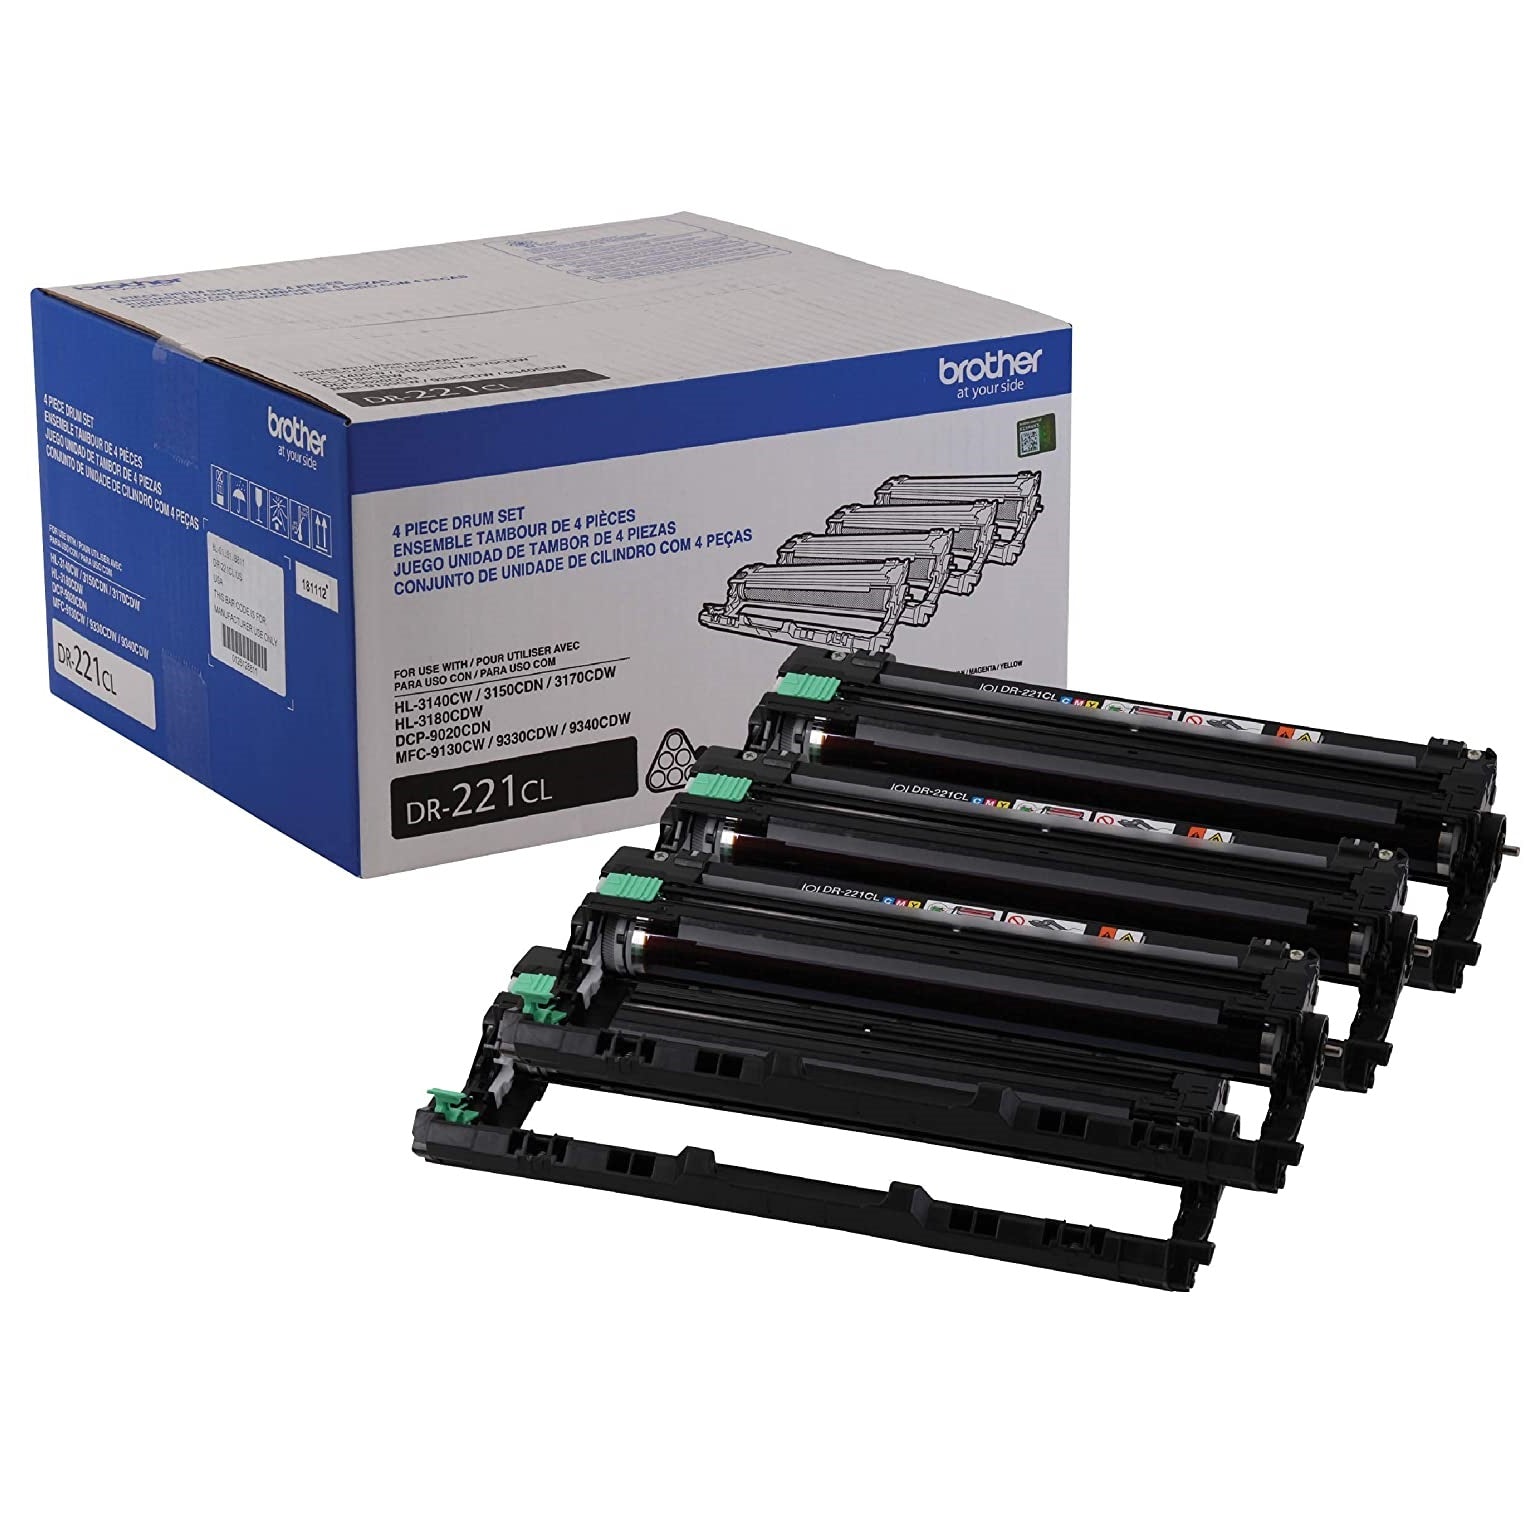 Absolute Toner Brother Genuine OEM DR-221 (DR221CL) Drum Unit, 4/Pack | Yields Upto 15,000 Pages Original Brother Cartridges